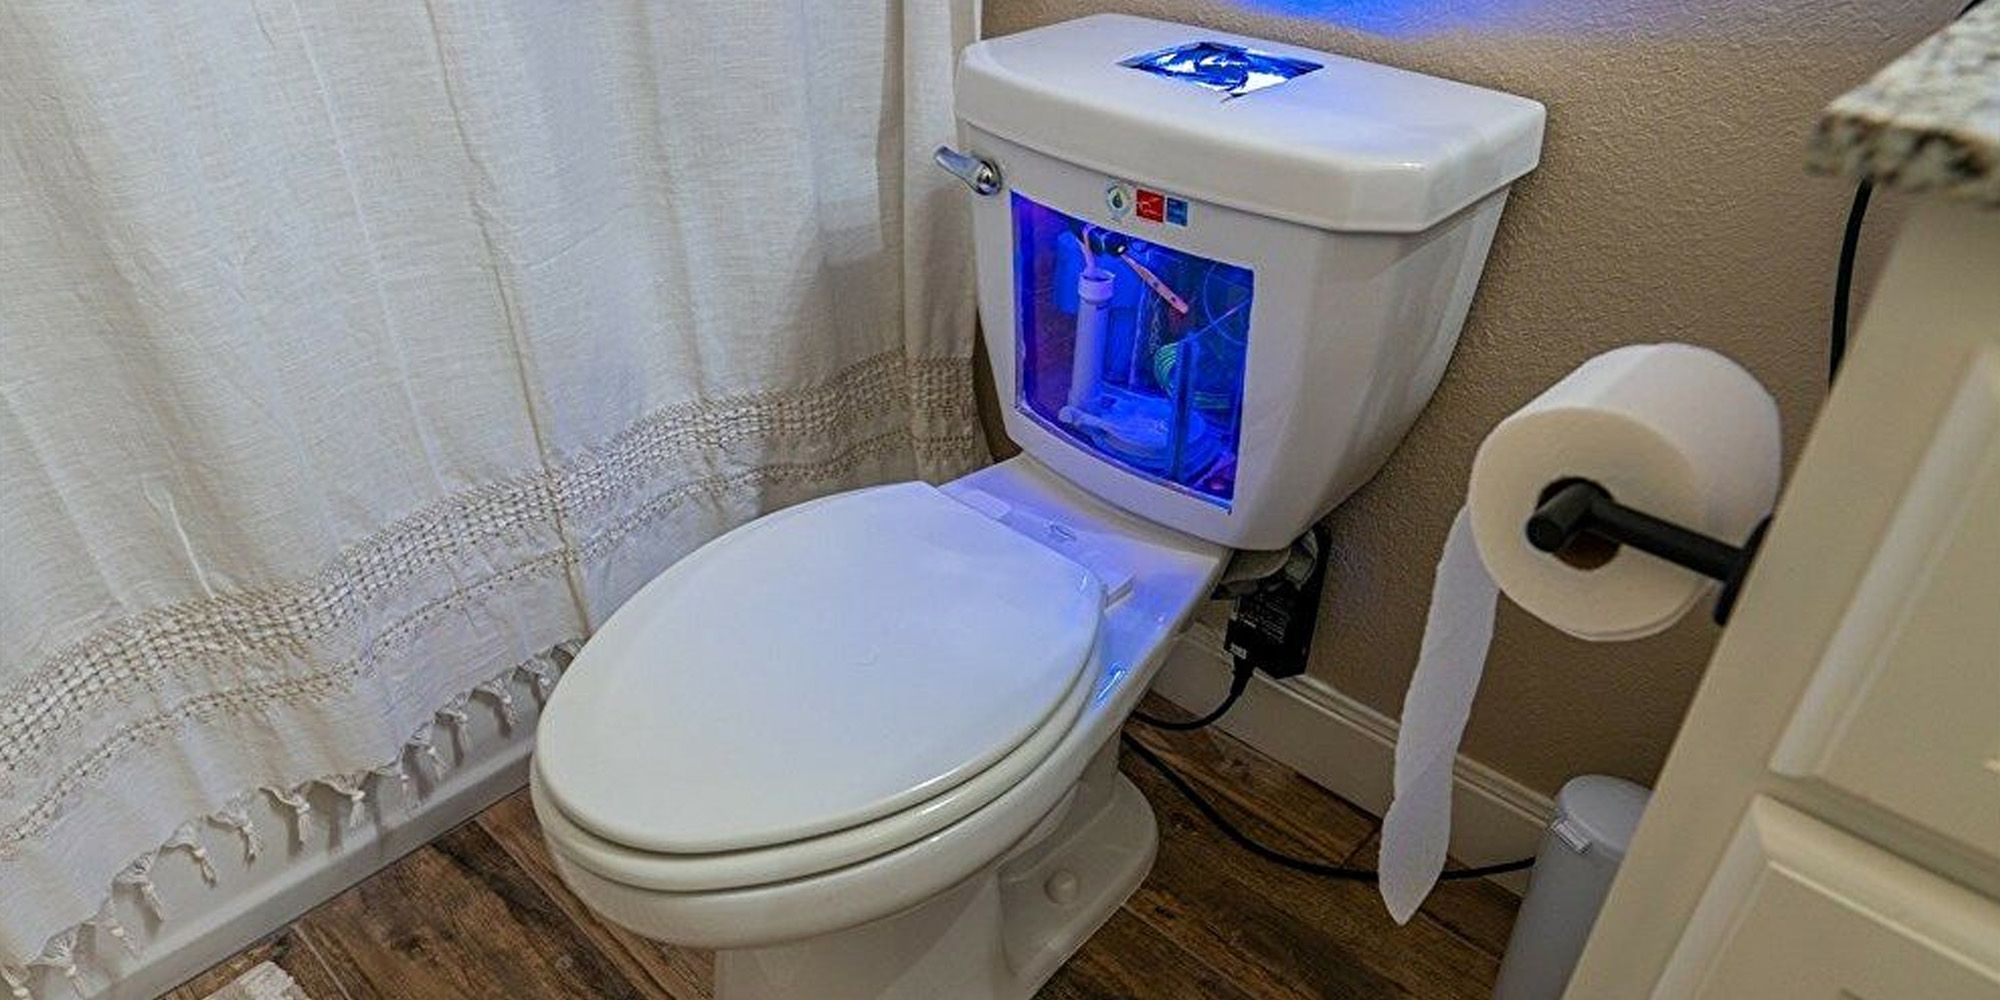 A Functioning Gaming PC Has Been Built Out Of A Toilet